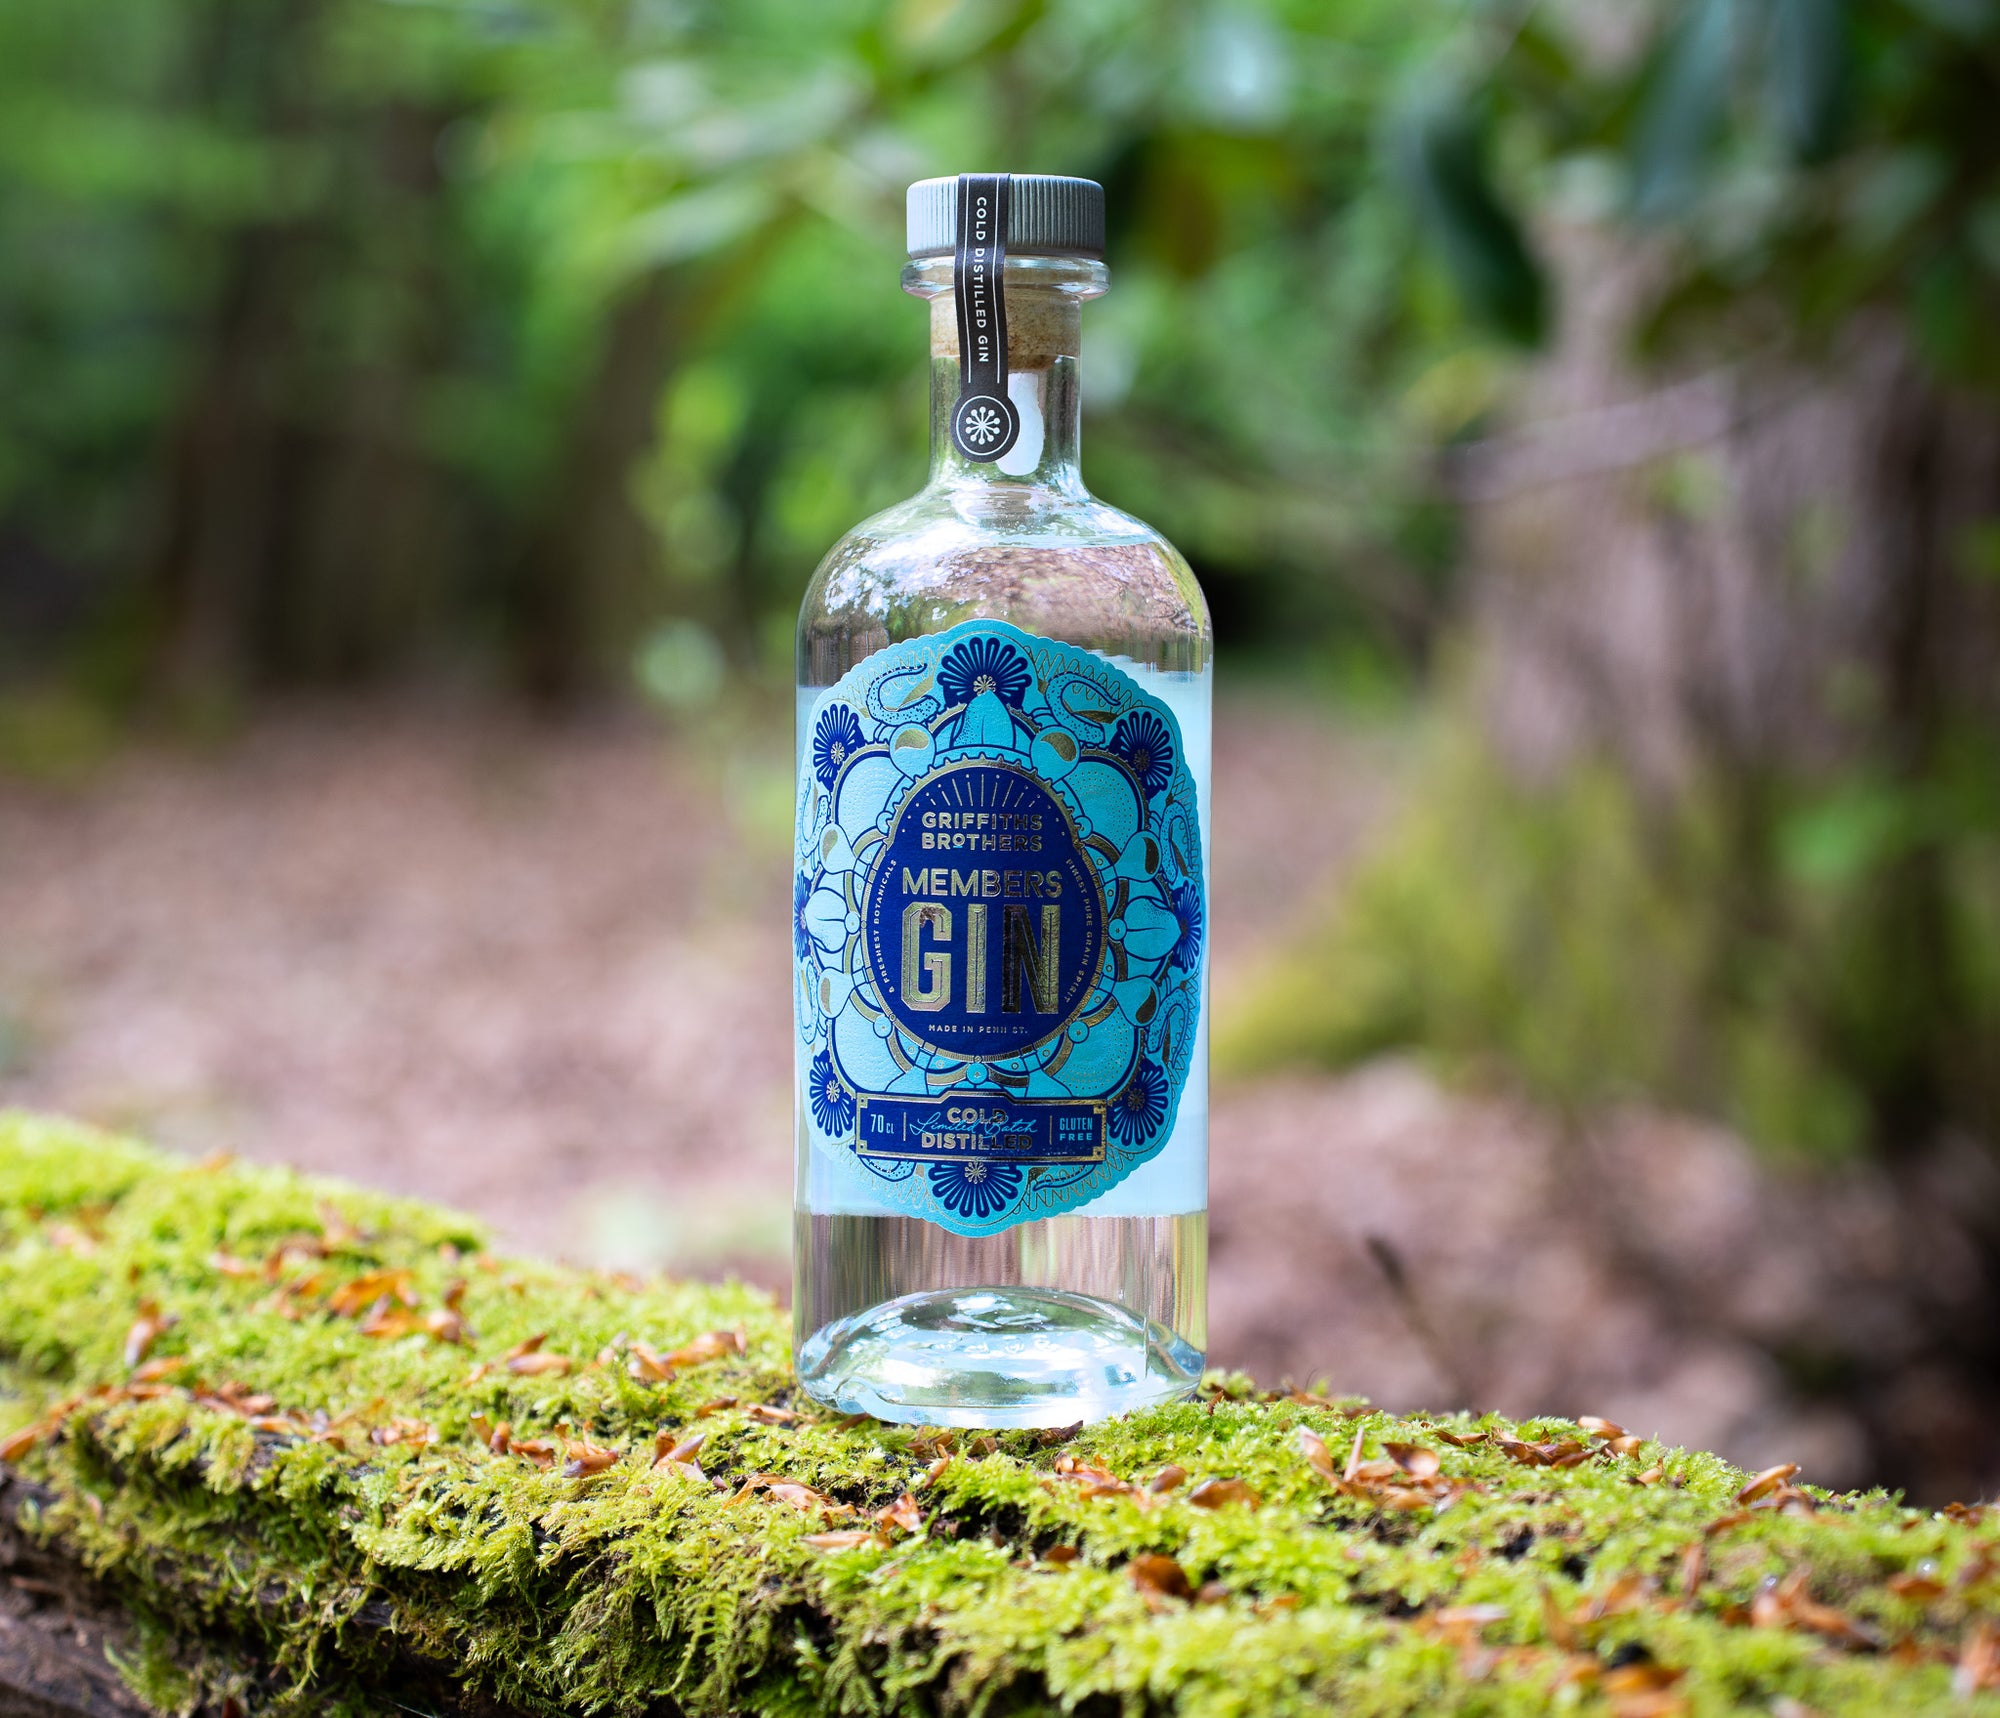 Members gin by Alfie Griffiths